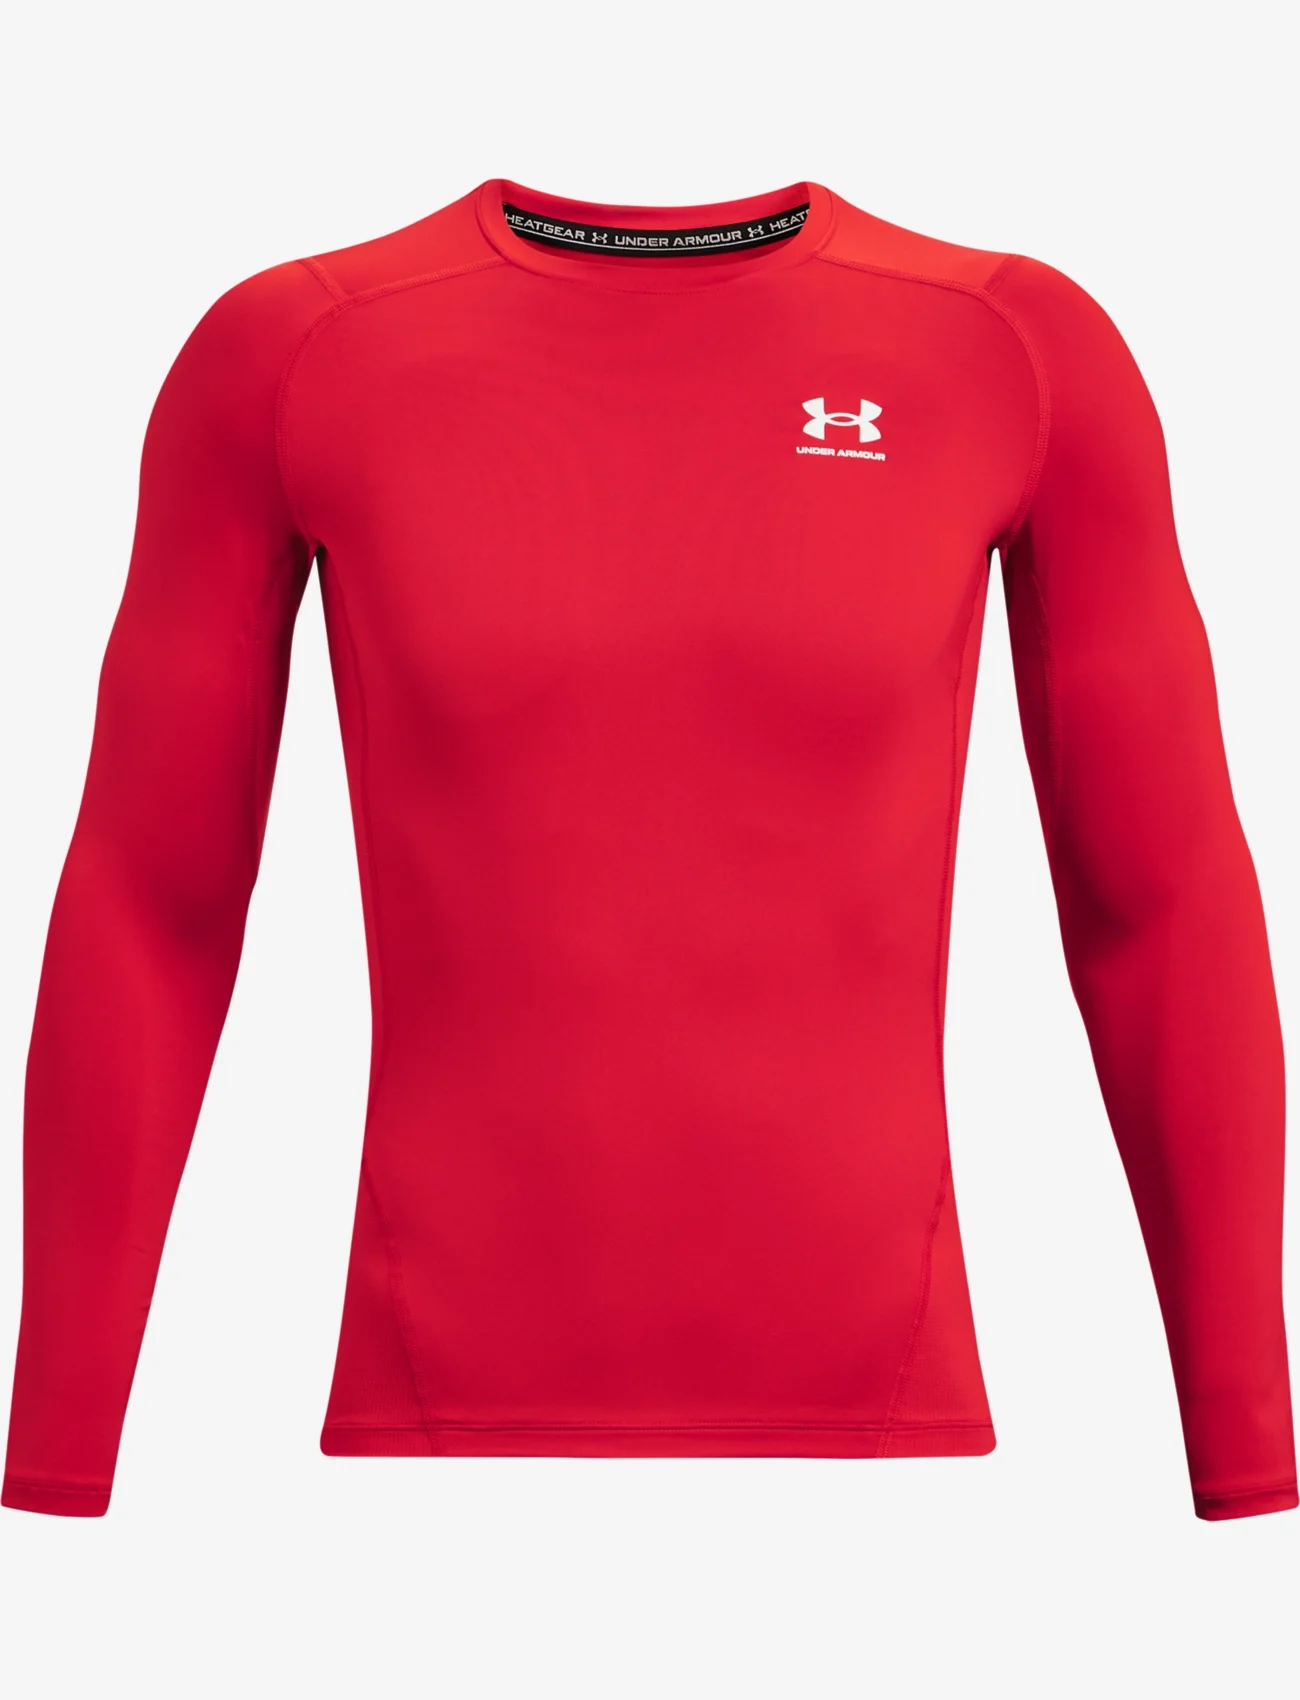 Under Armour - UA HG Armour Comp LS - longsleeved tops - red - 0